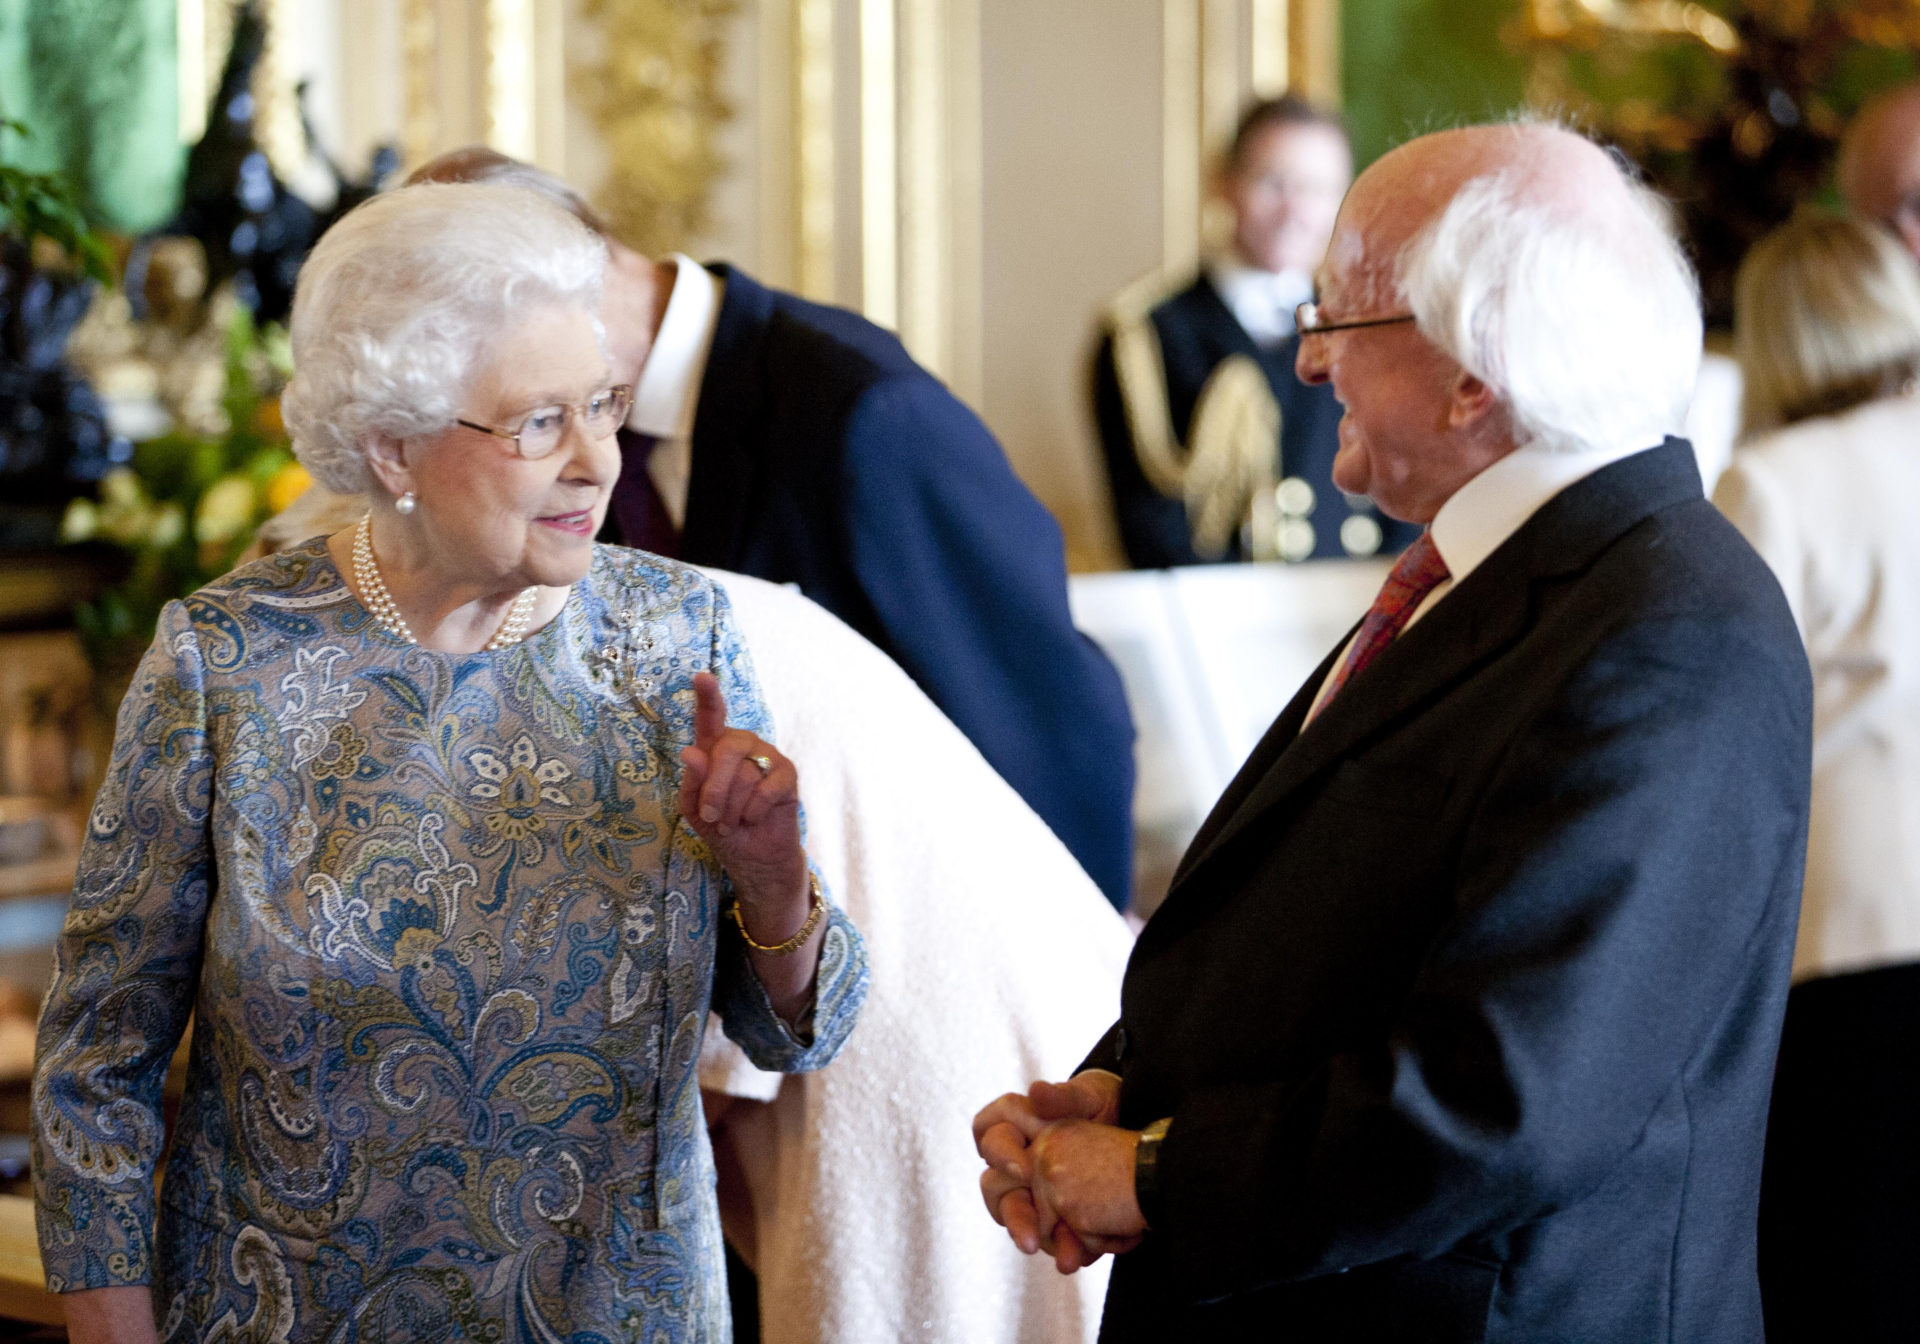 President Michael D Higgins with Britain's Queen Elizabeth II viewing a display of Irish items from the Royal Collection in the Green Drawing Room at Windsor Castle during a visit in April 2014